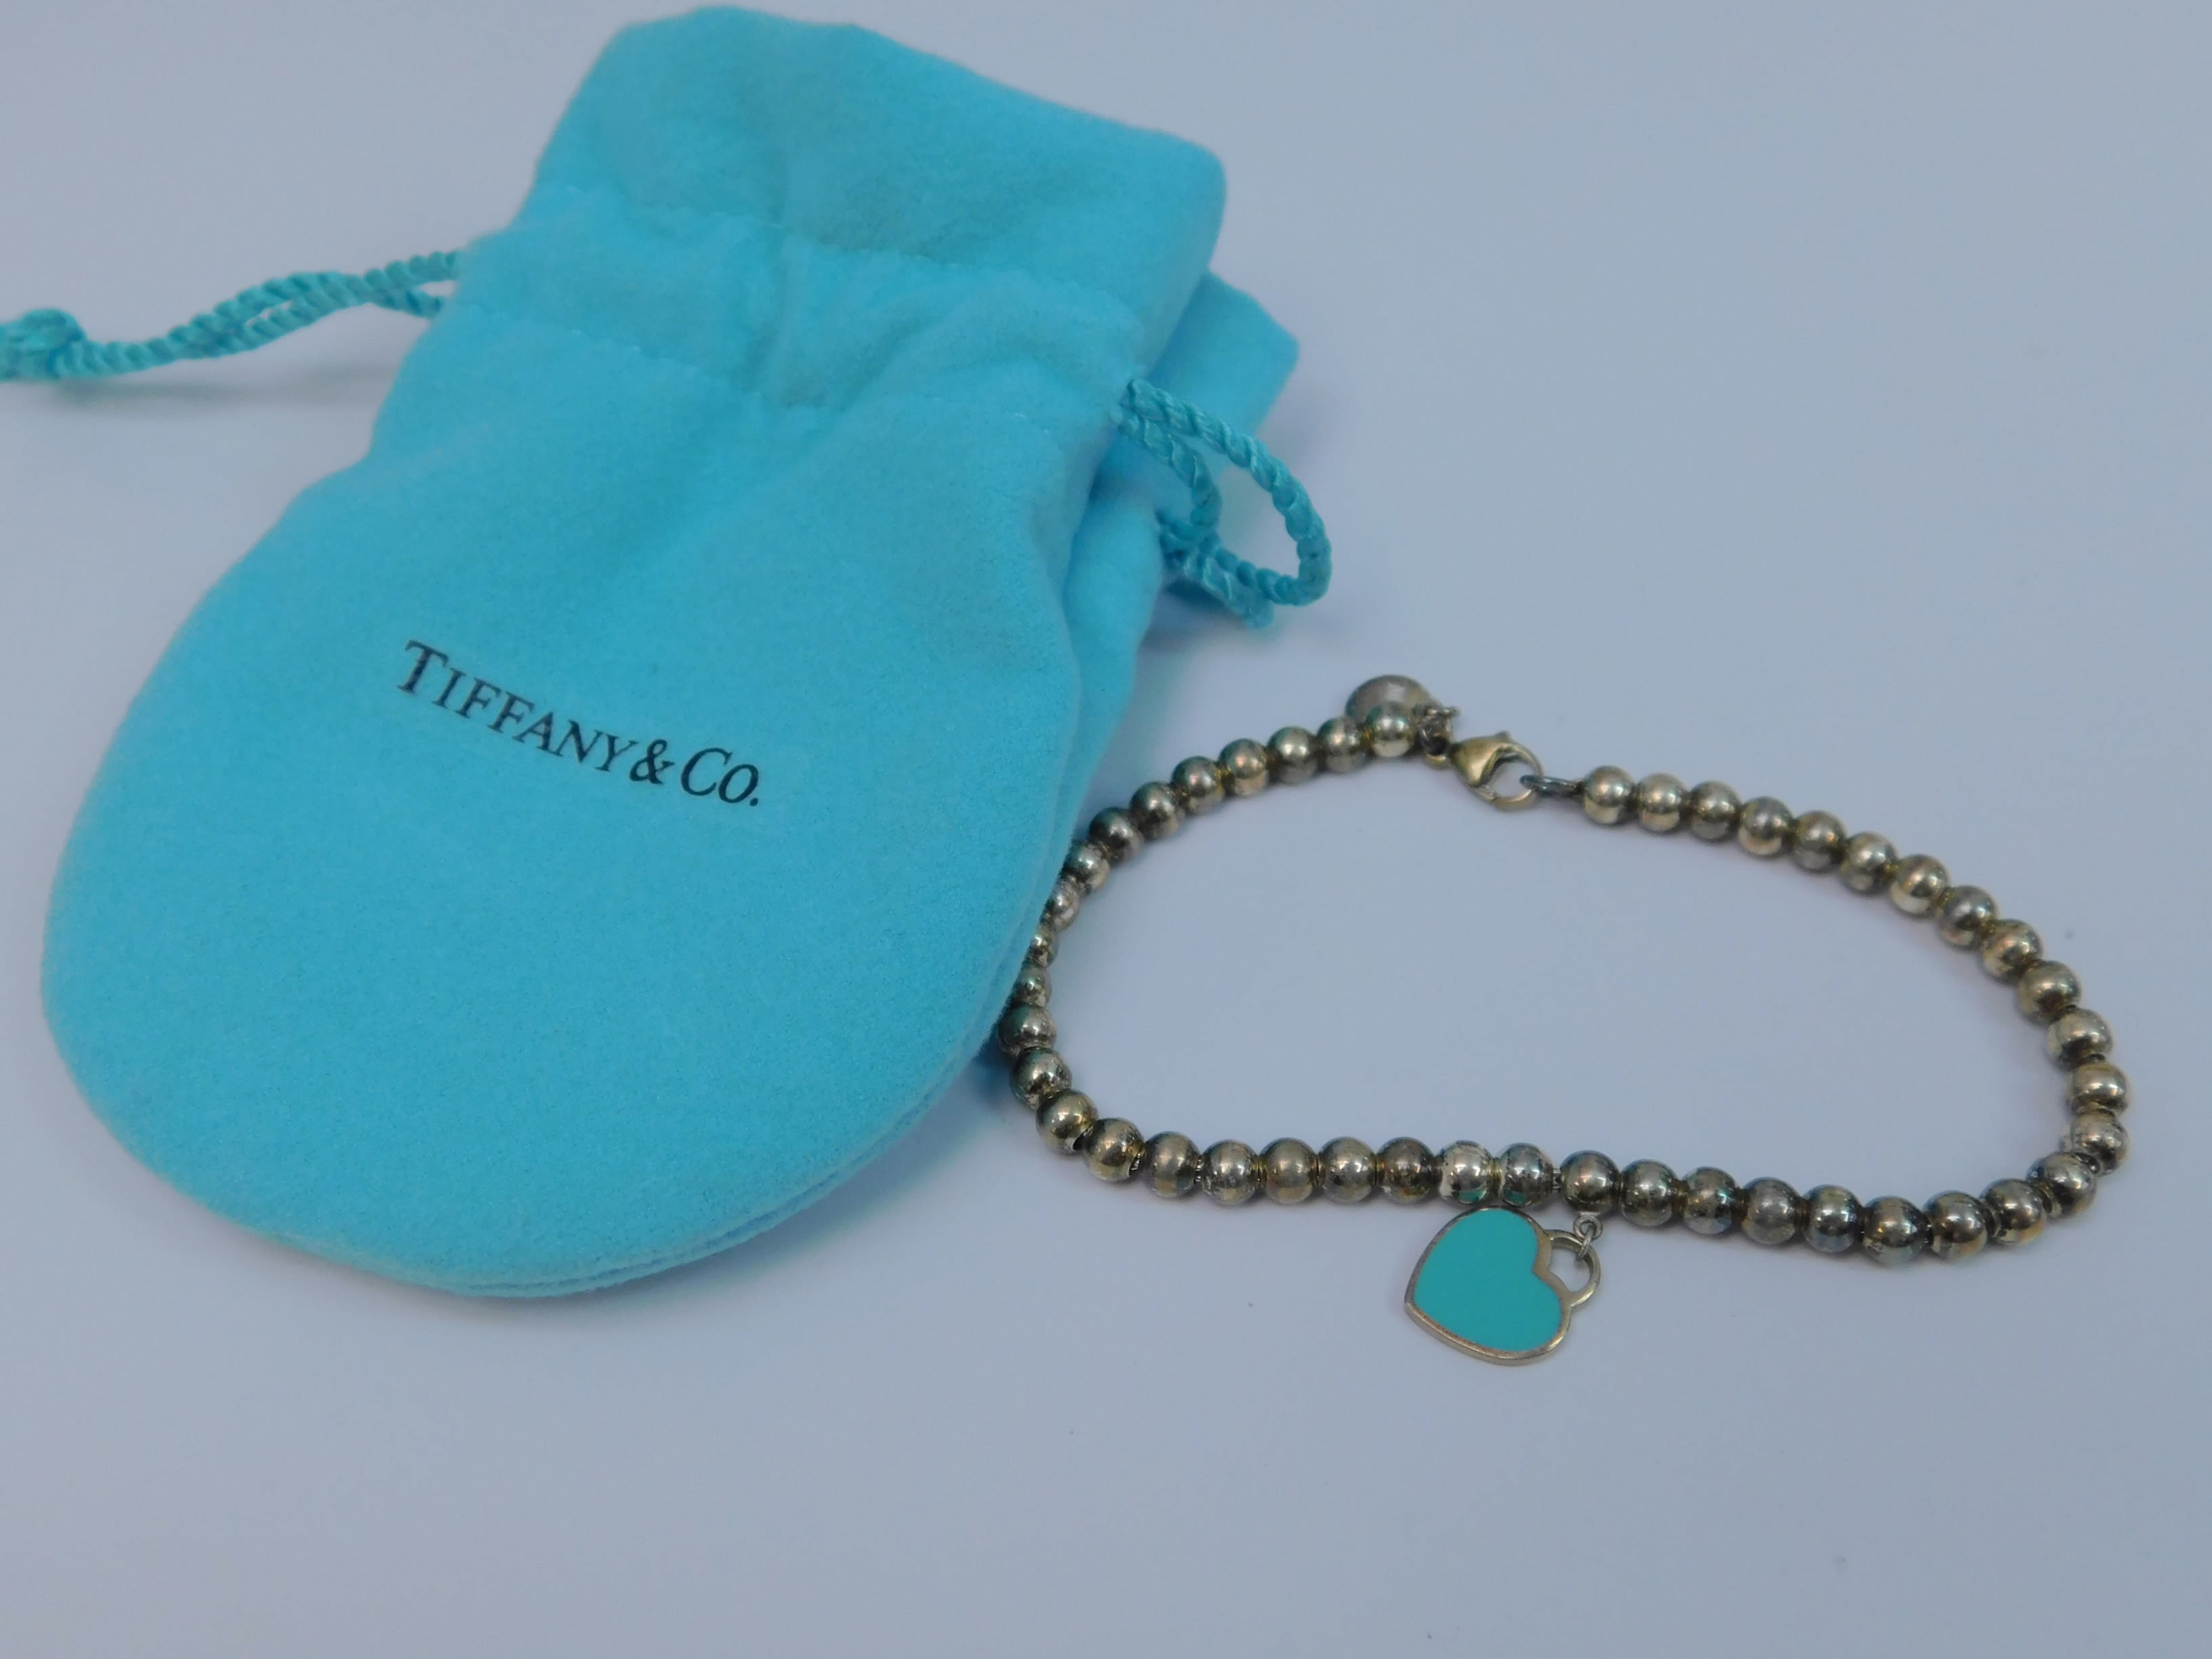 Tiffany & Co Sterling Silver Ball Beaded Necklace 18